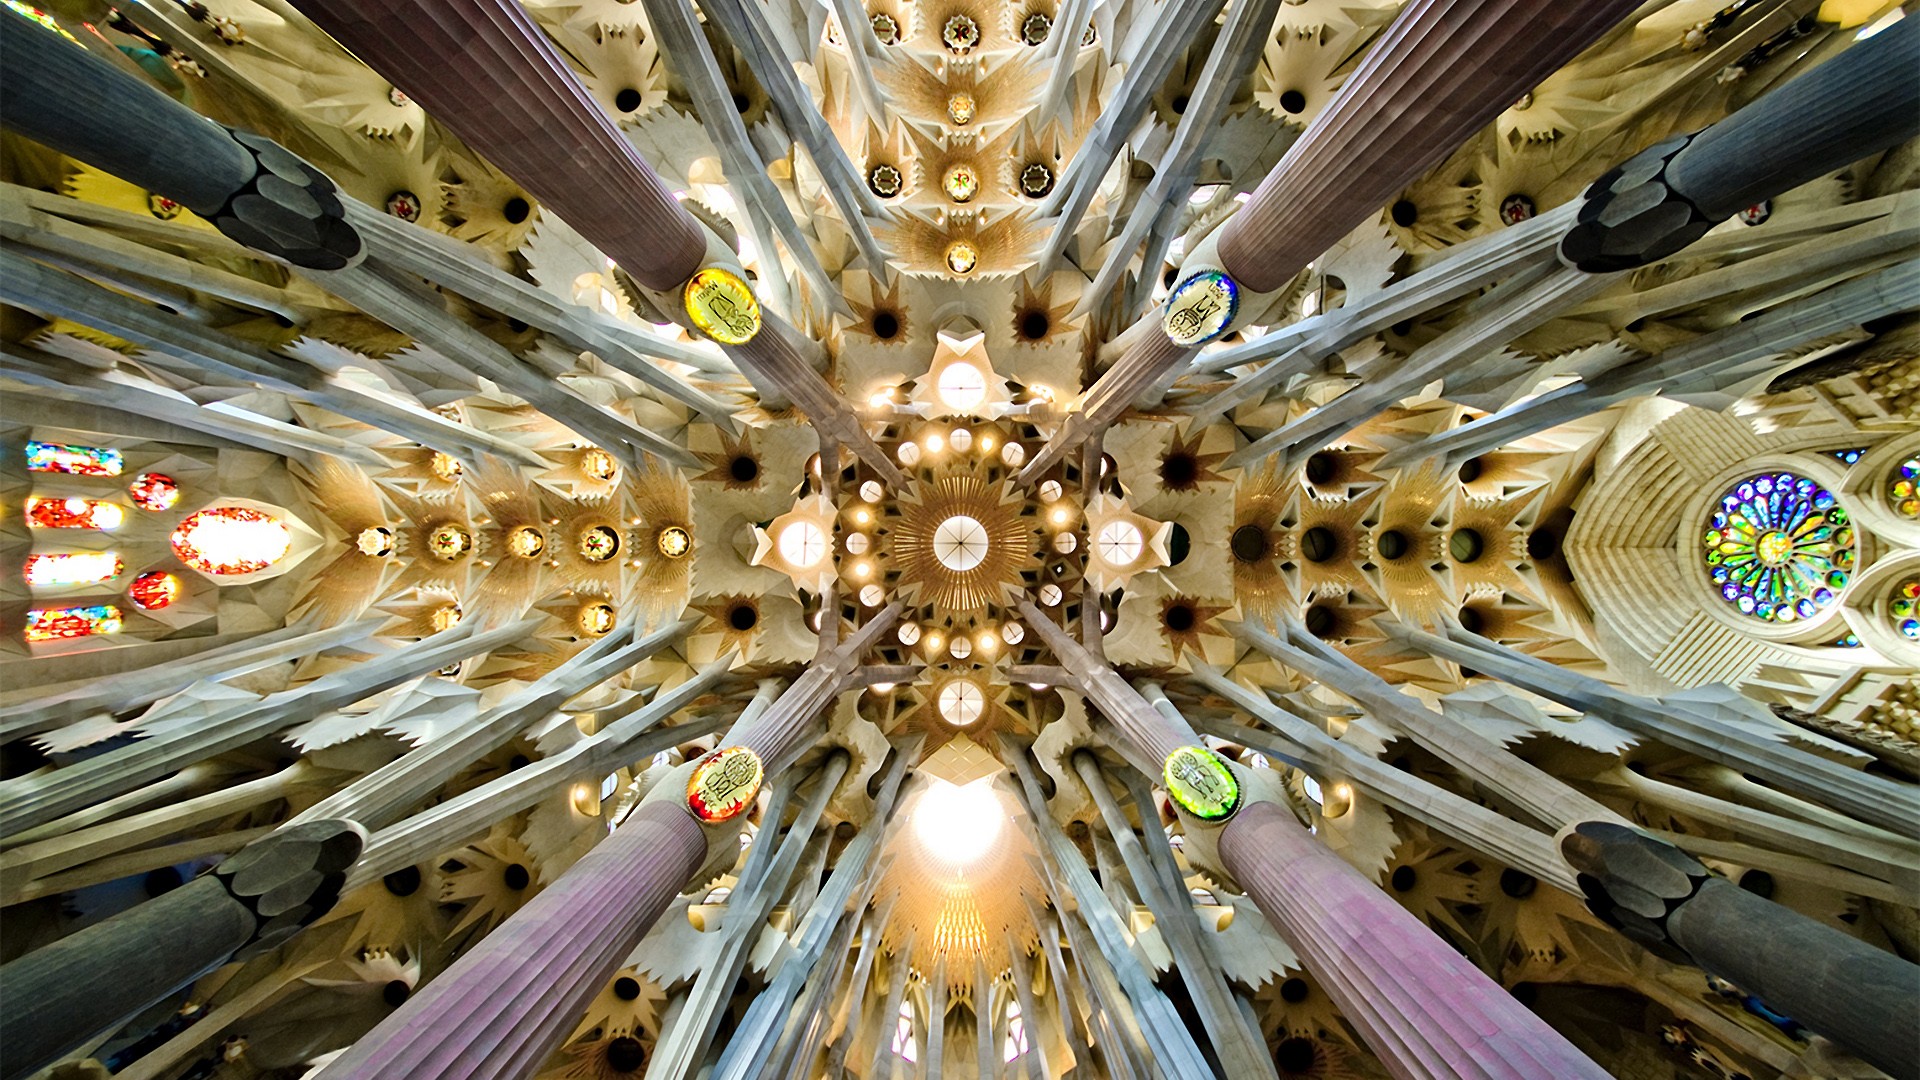 General 1920x1080 architecture cathedral Sagrada Familia Barcelona Spain arch rooftops worm's eye view pillar mosaic window interior symmetry bottom view